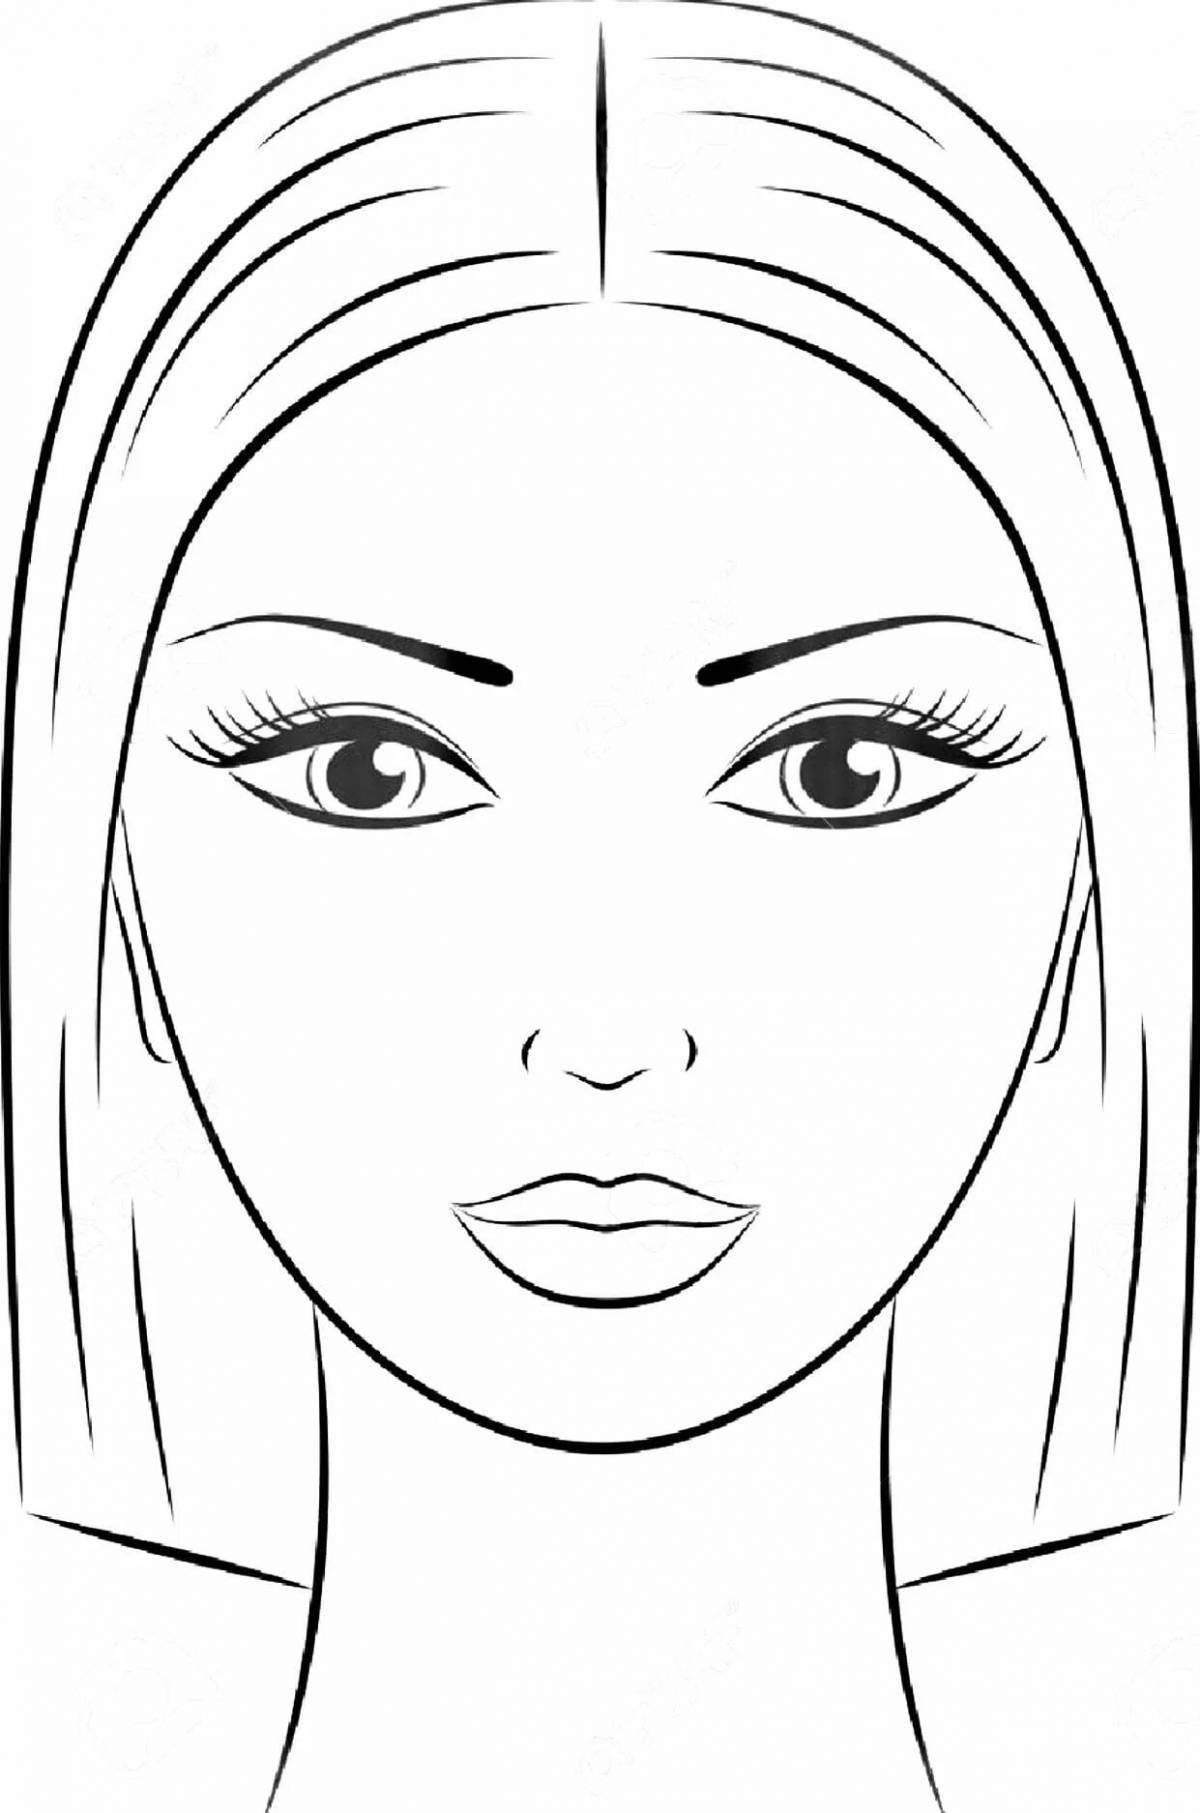 Colorful make-up woman face coloring page